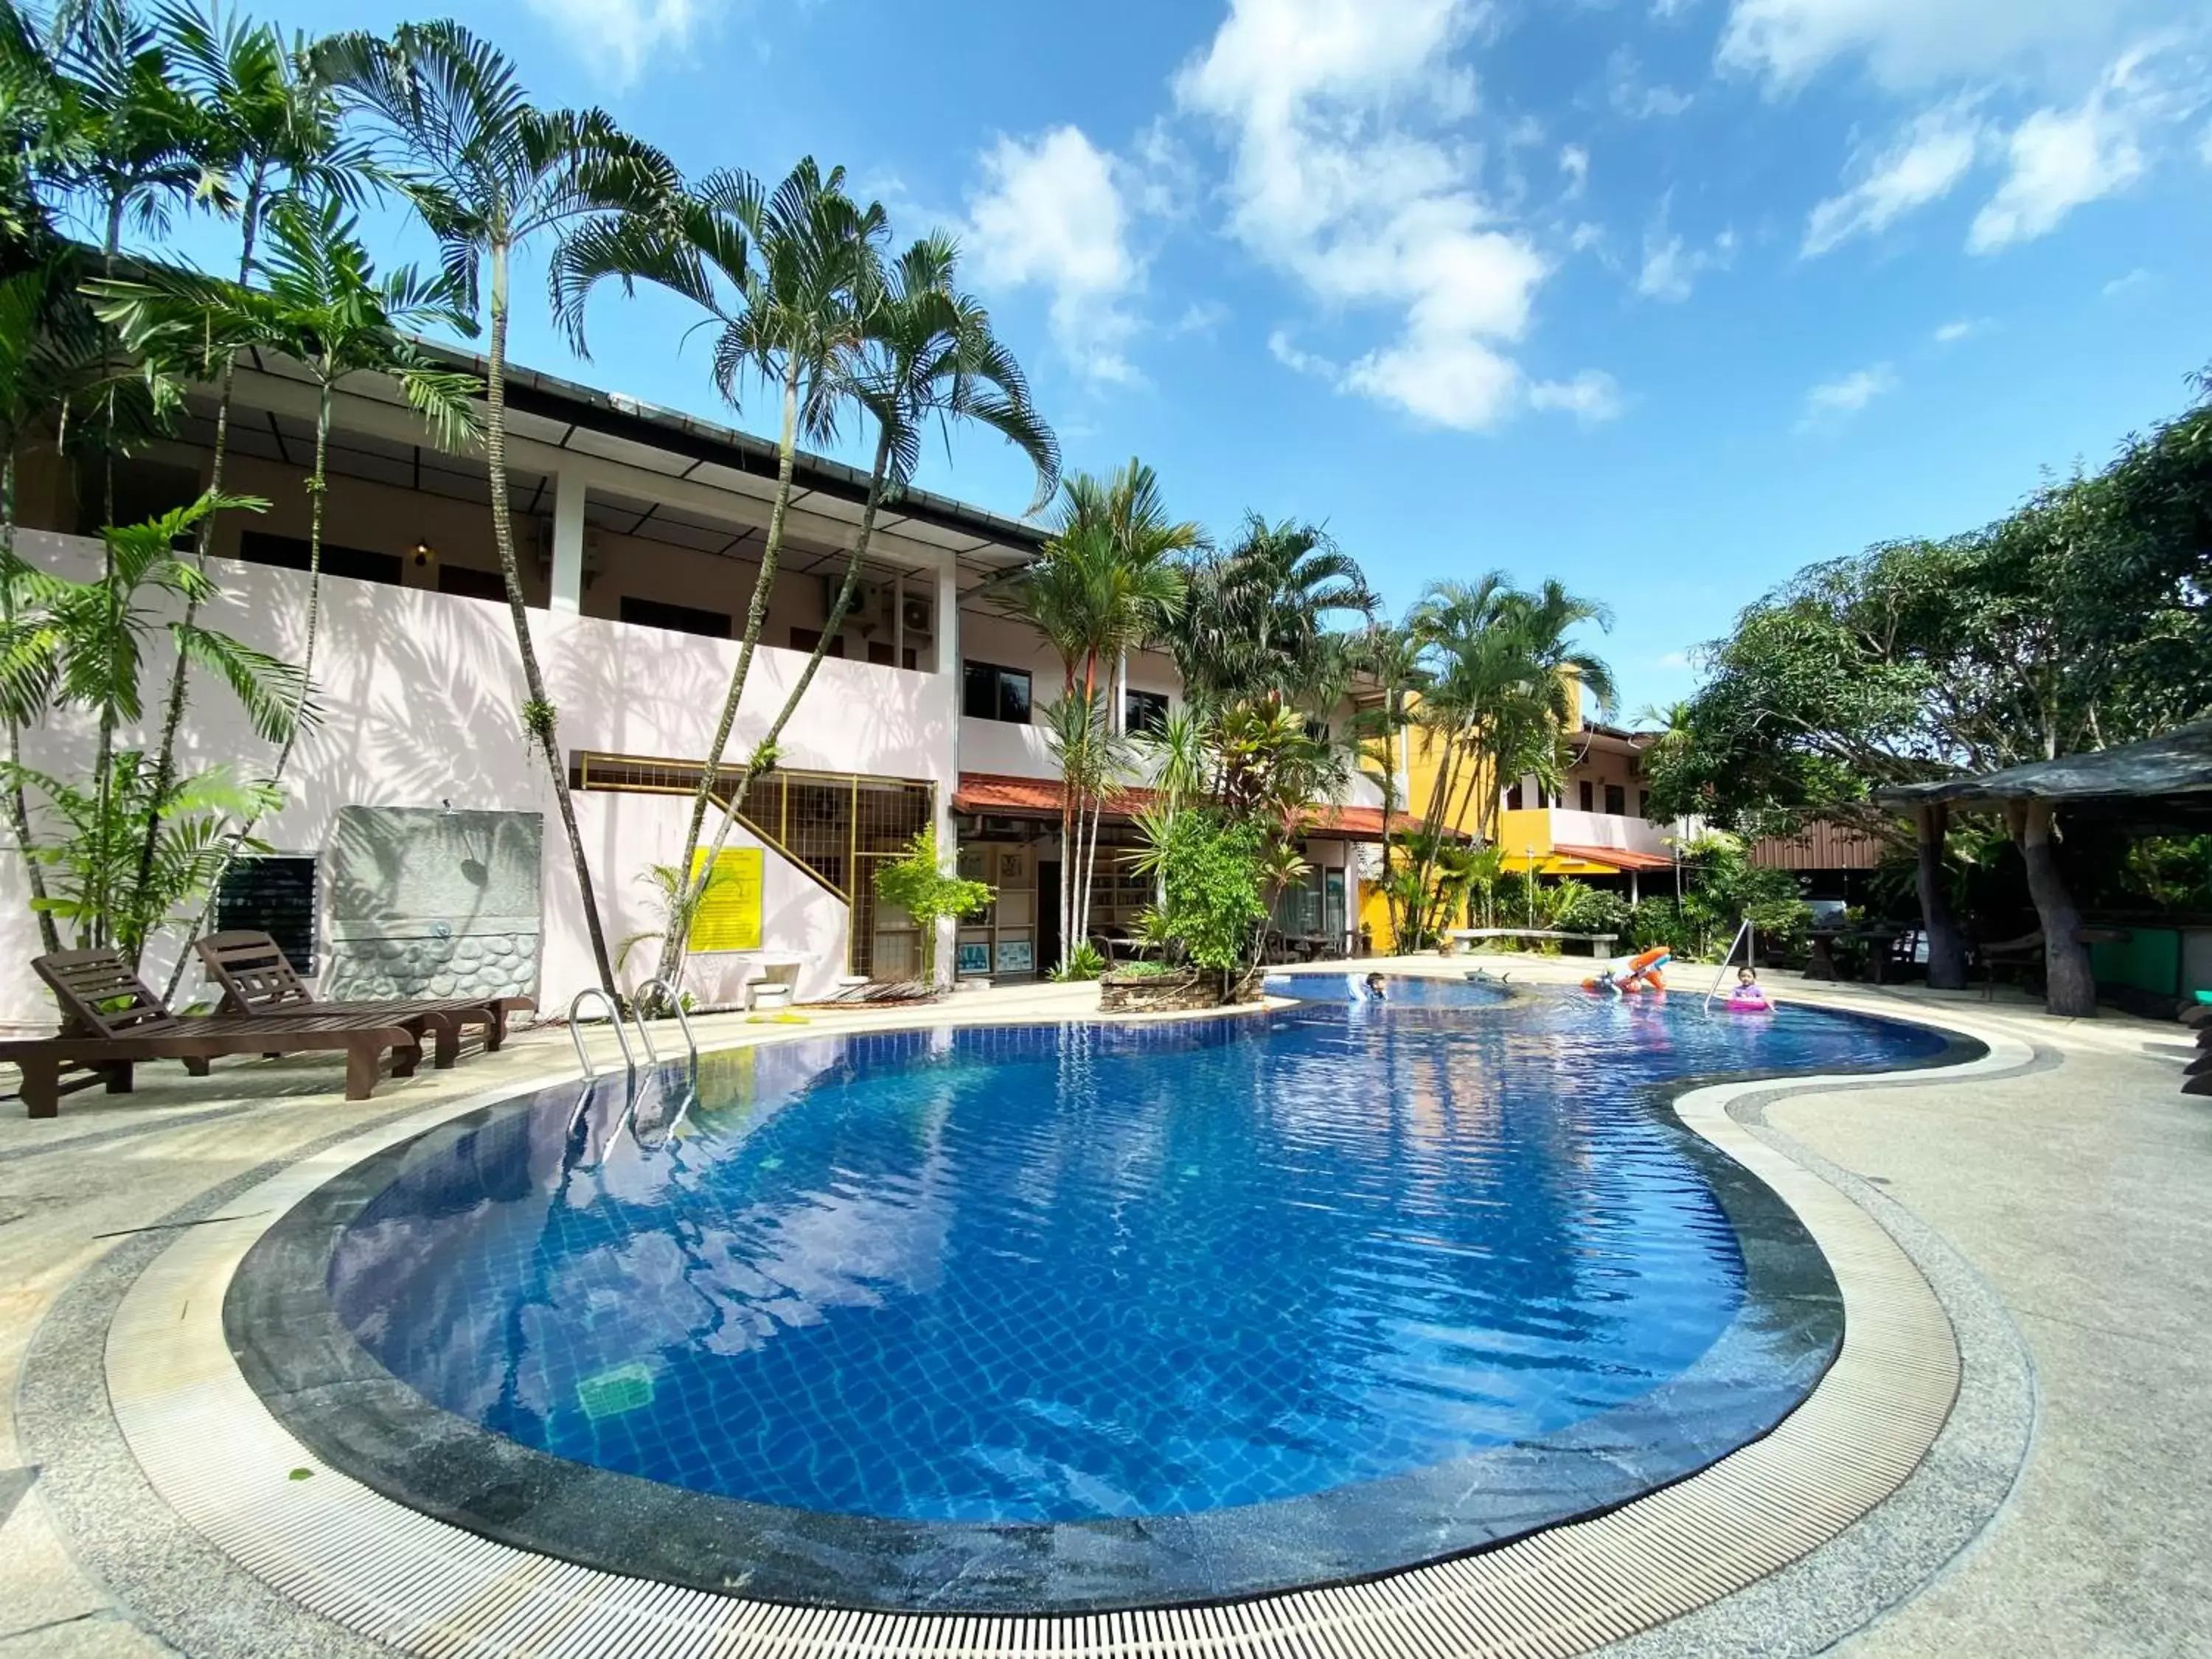 Property building, Swimming Pool in Khaolak Grand City